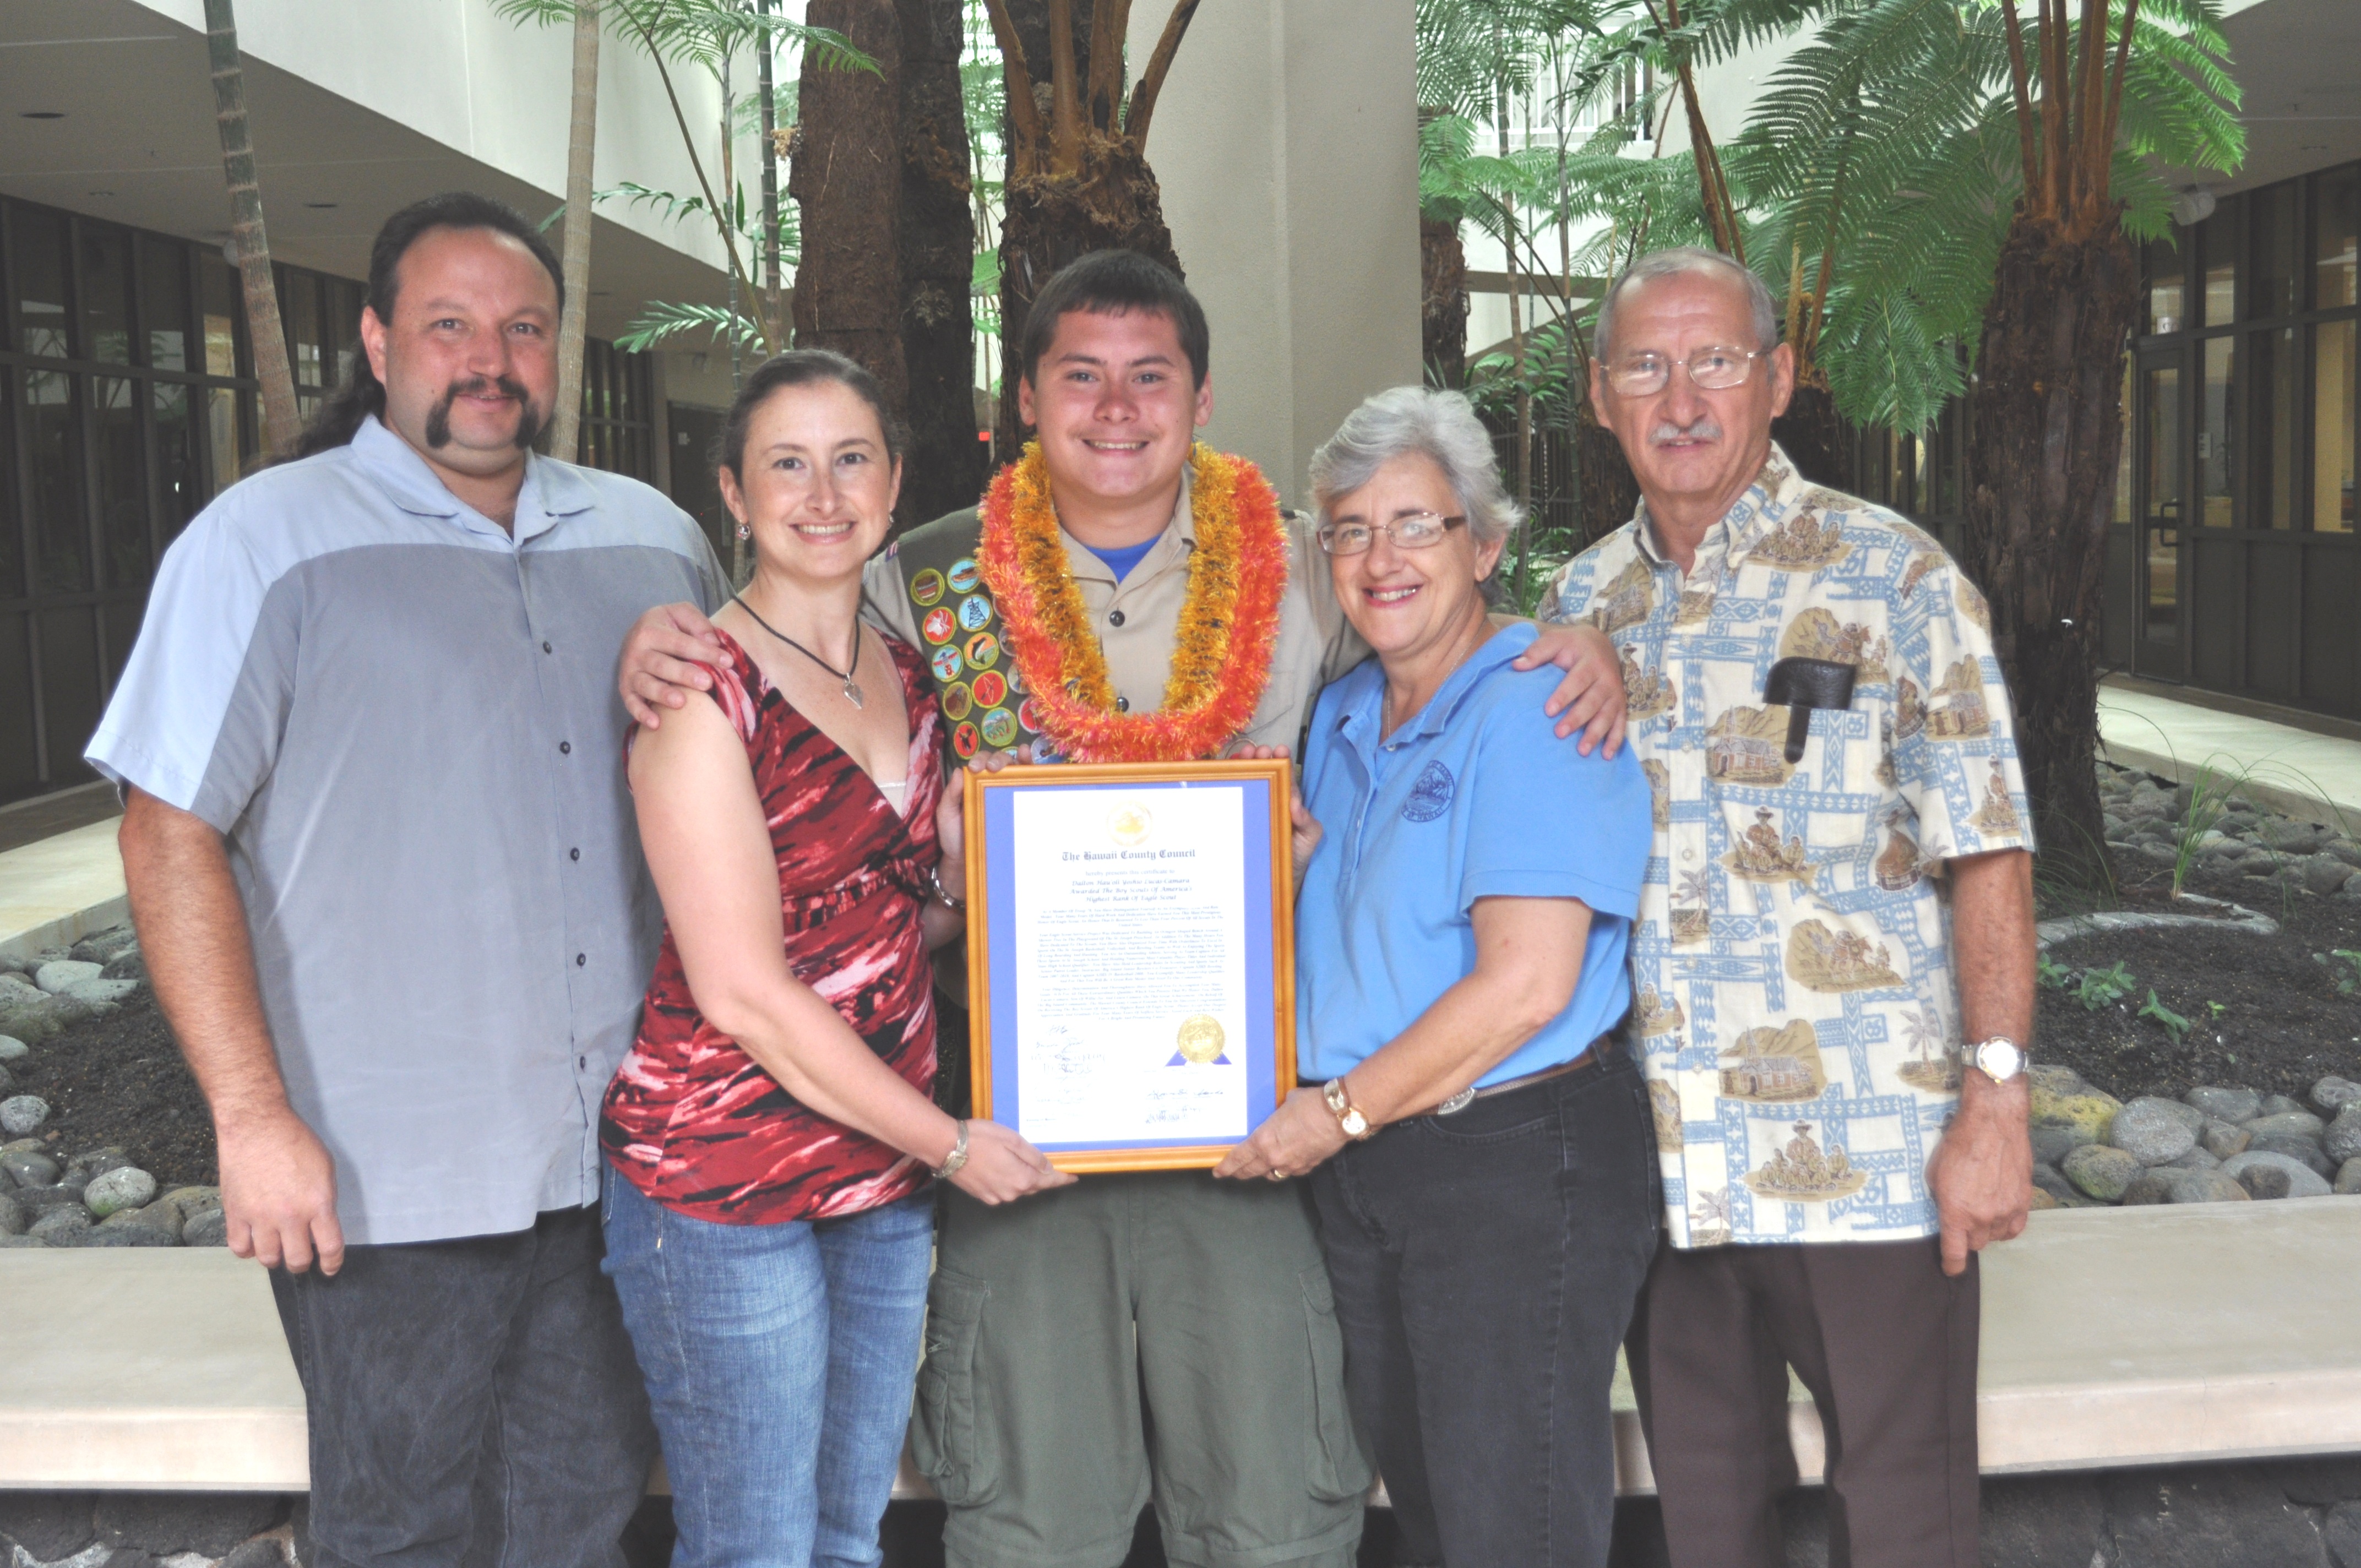 Friends of Donald Ikeda | Continuing to work collaboratively to make Hilo a better ...